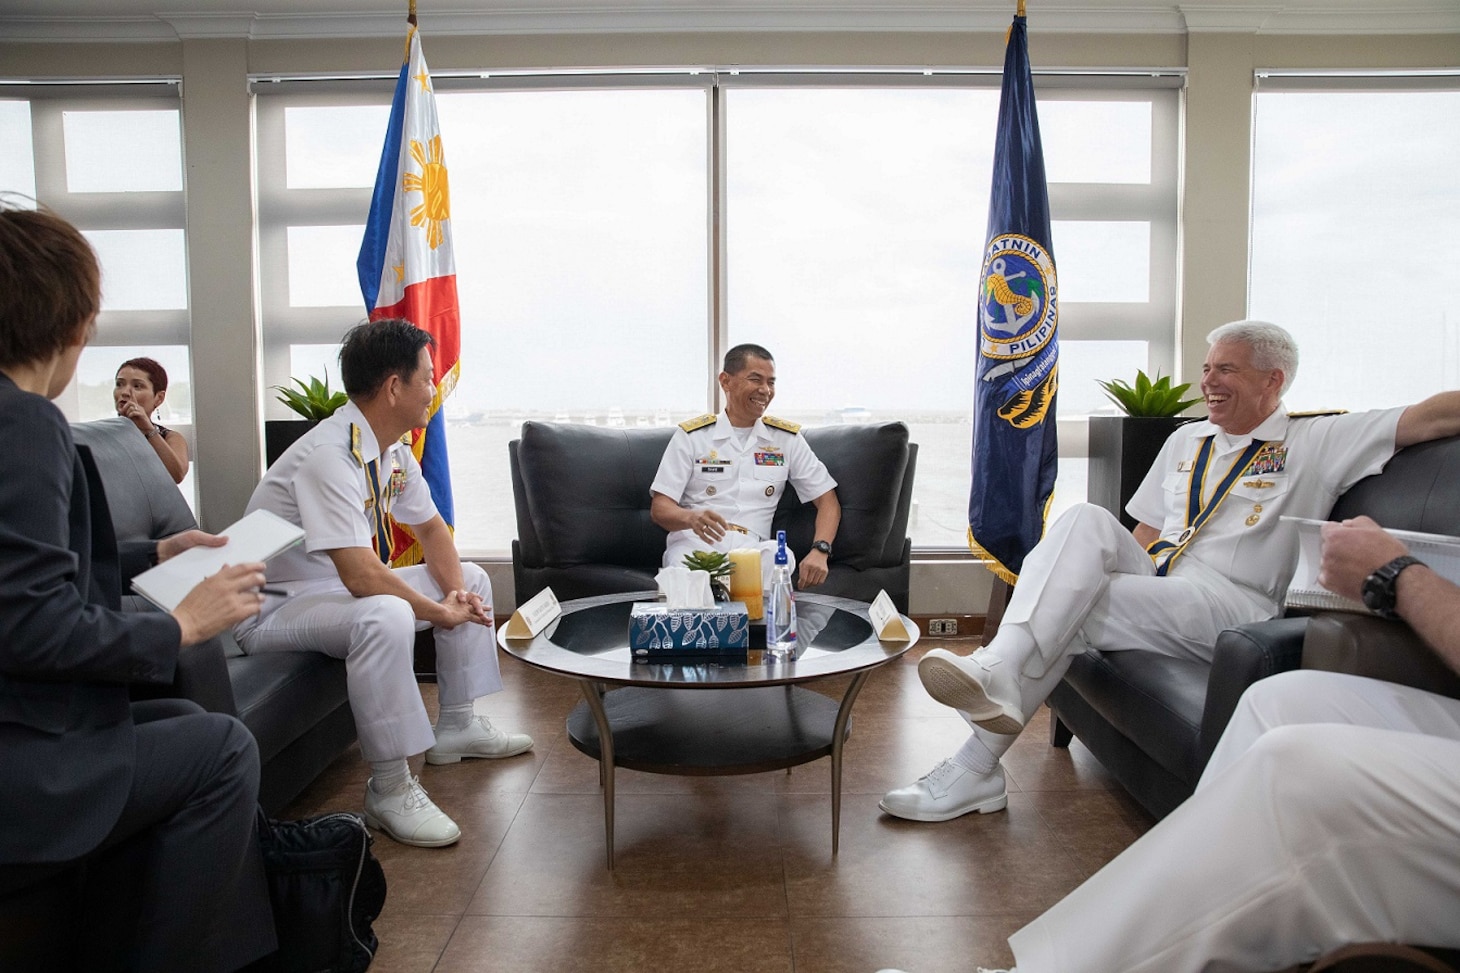 Japan Maritime Self-Defense Force Commander-in-Chief Self-Defense Fleet Vice Adm. SAITO Akira; Philippine Fleet Commander Rear Adm. Renato David; and Commander U.S. 7th Fleet Vice Admiral Karl Thomas conduct staff talks in Manila, Philippines, Aug. 27. U.S. 7th Fleet is the U.S. Navy’s largest forward-deployed numbered fleet, and routinely interacts and operates with allies and partners to preserve a free and open Indo-Pacific.